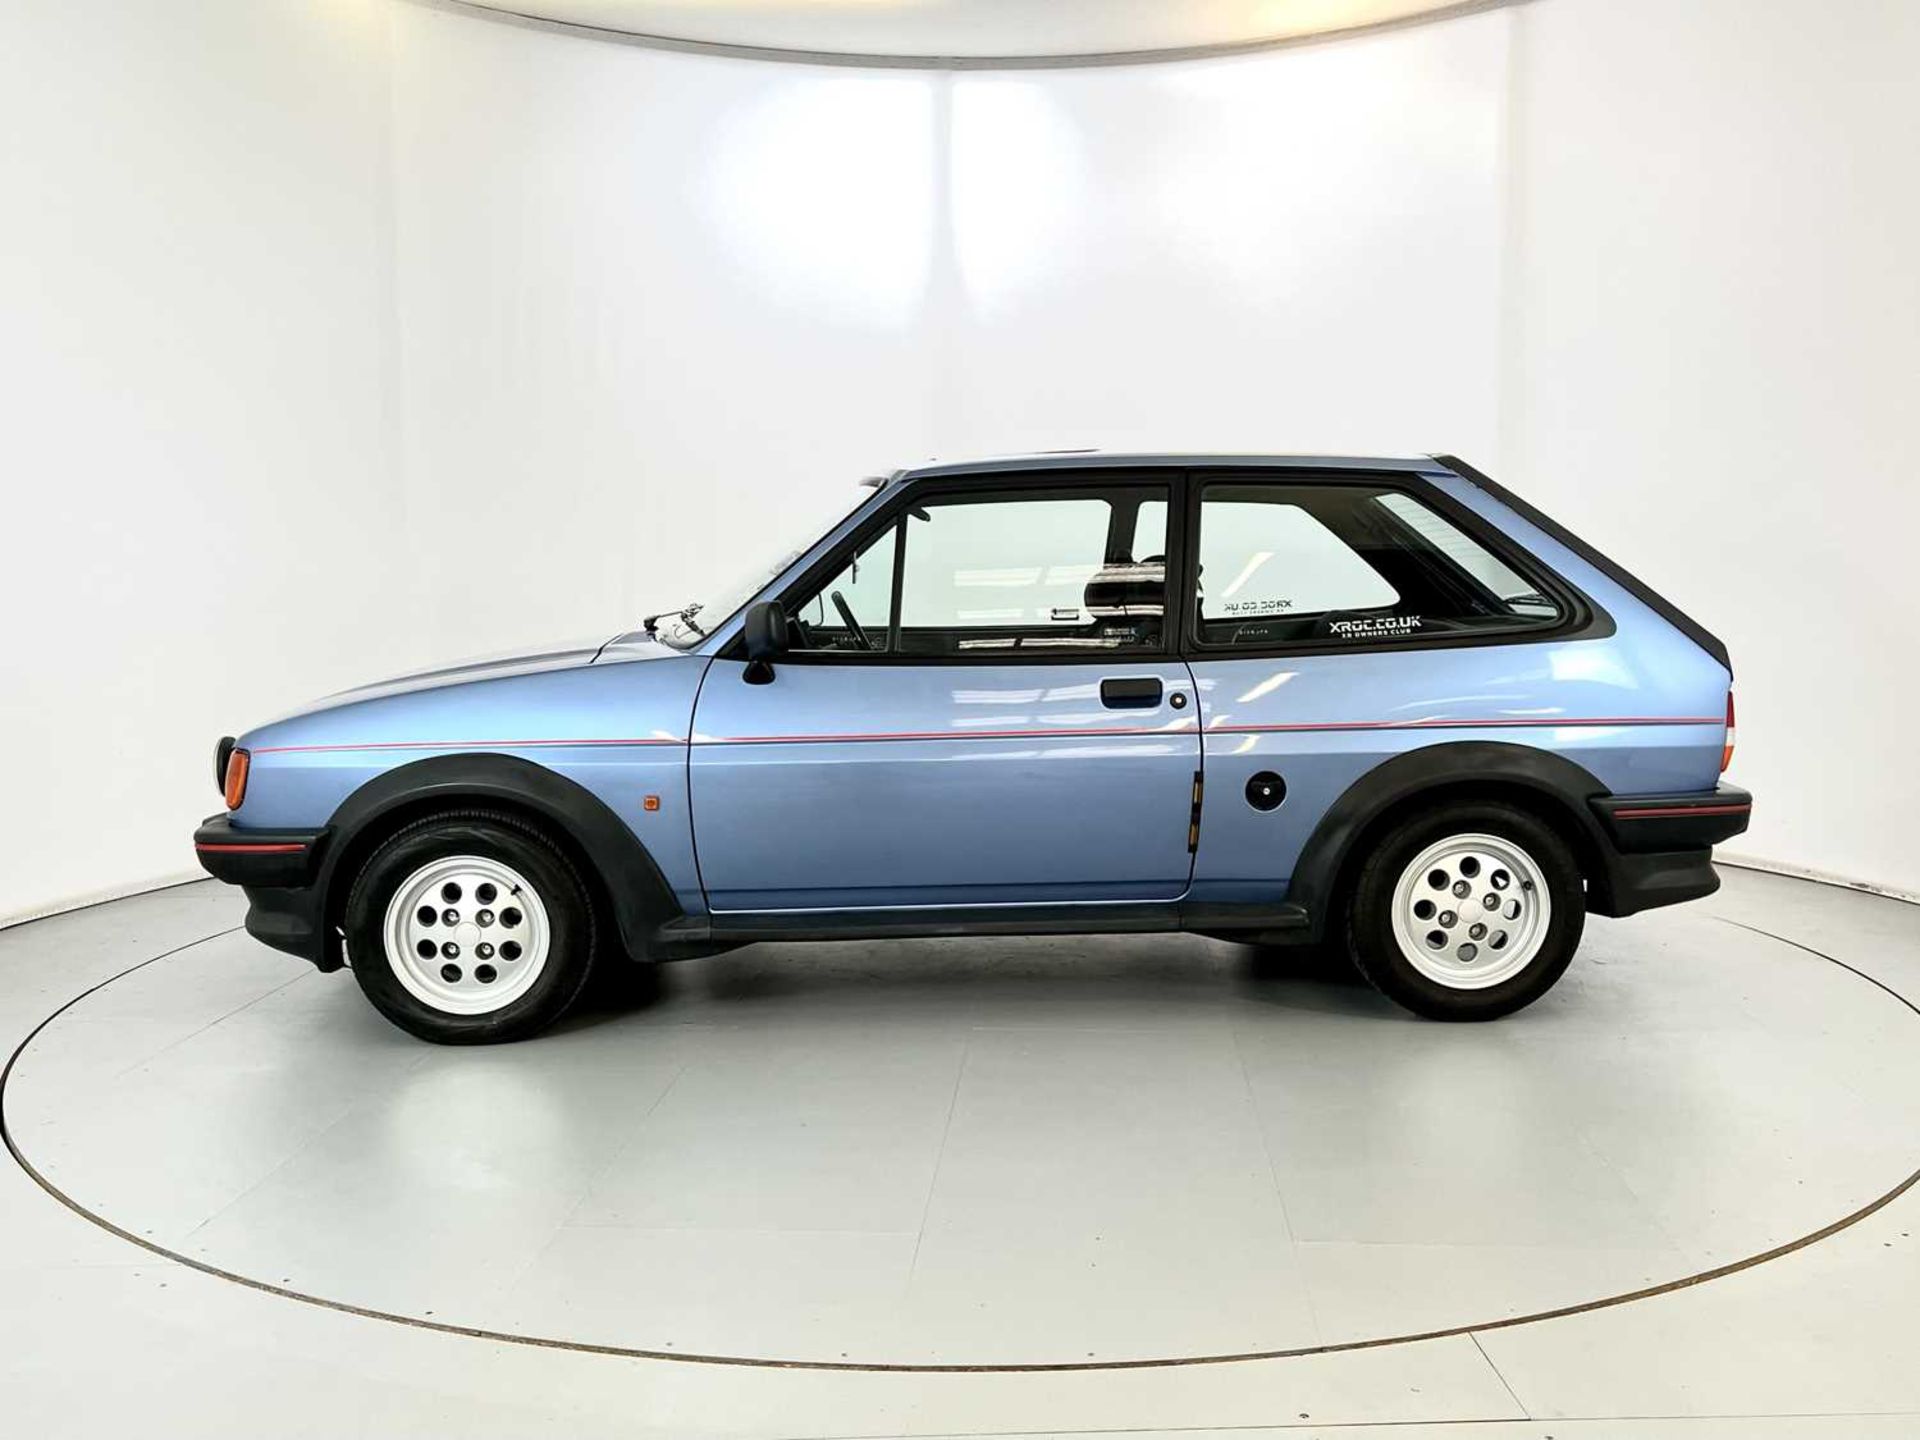 1986 Ford Fiesta XR2 - Image 5 of 33